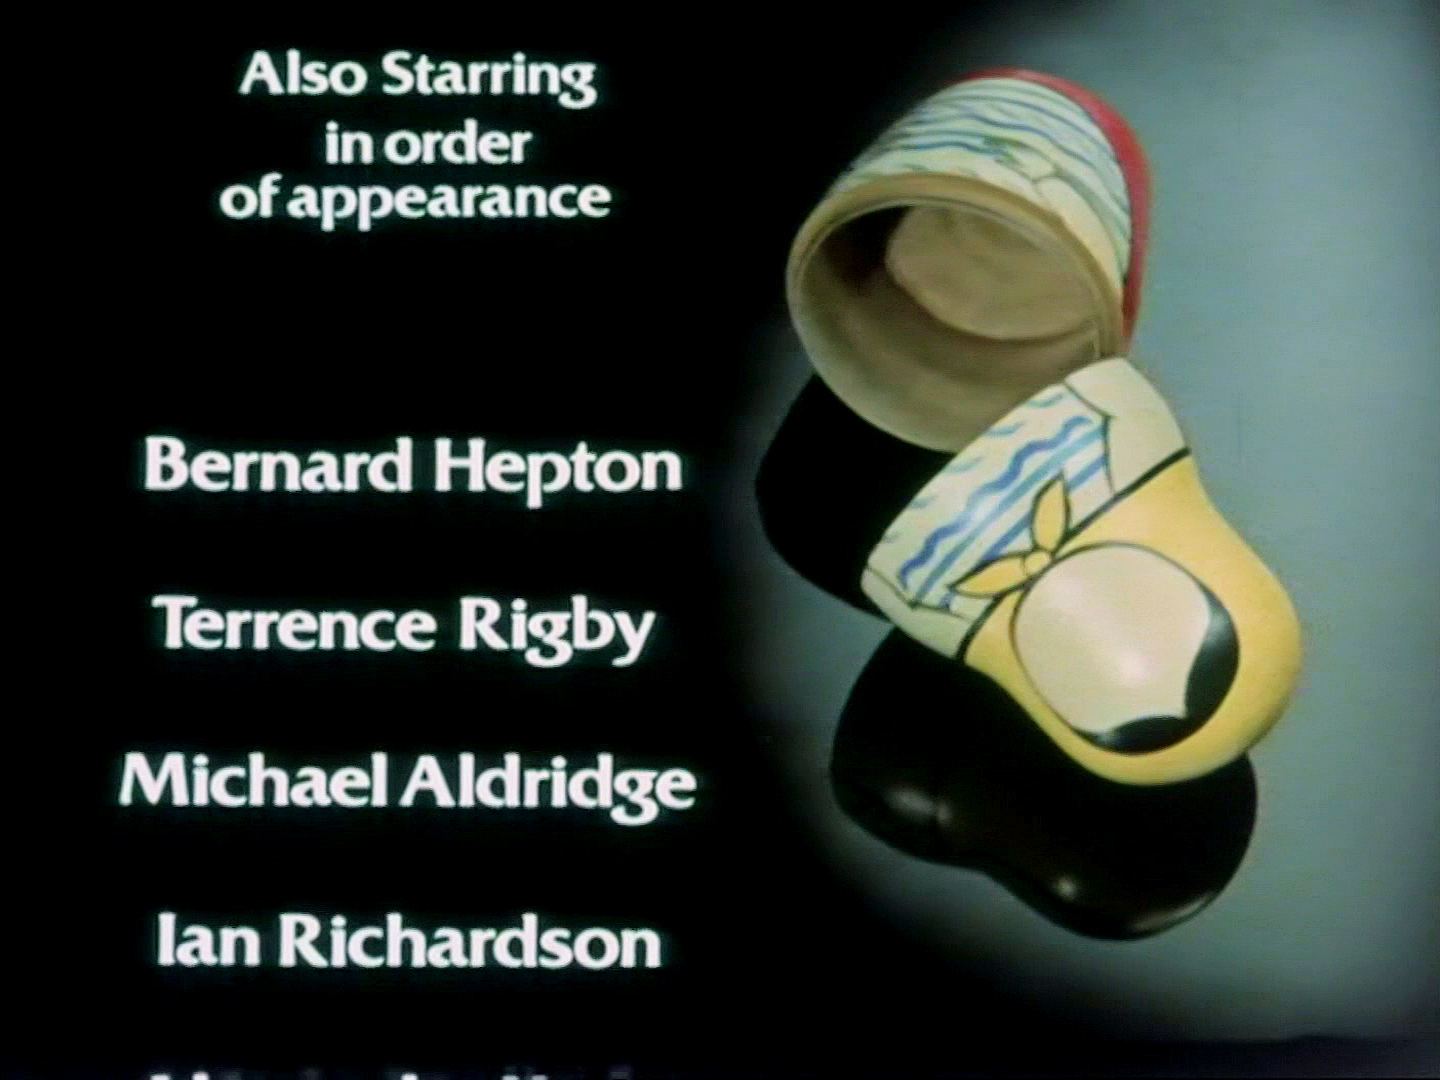 Main title from the 1979 ‘Part One’ episode of Tinker Tailor Soldier Spy (1979) (4). Also starring in order of appearance Bernard Hepton, Terence Rigby, Michael Aldridge, Ian Richardson